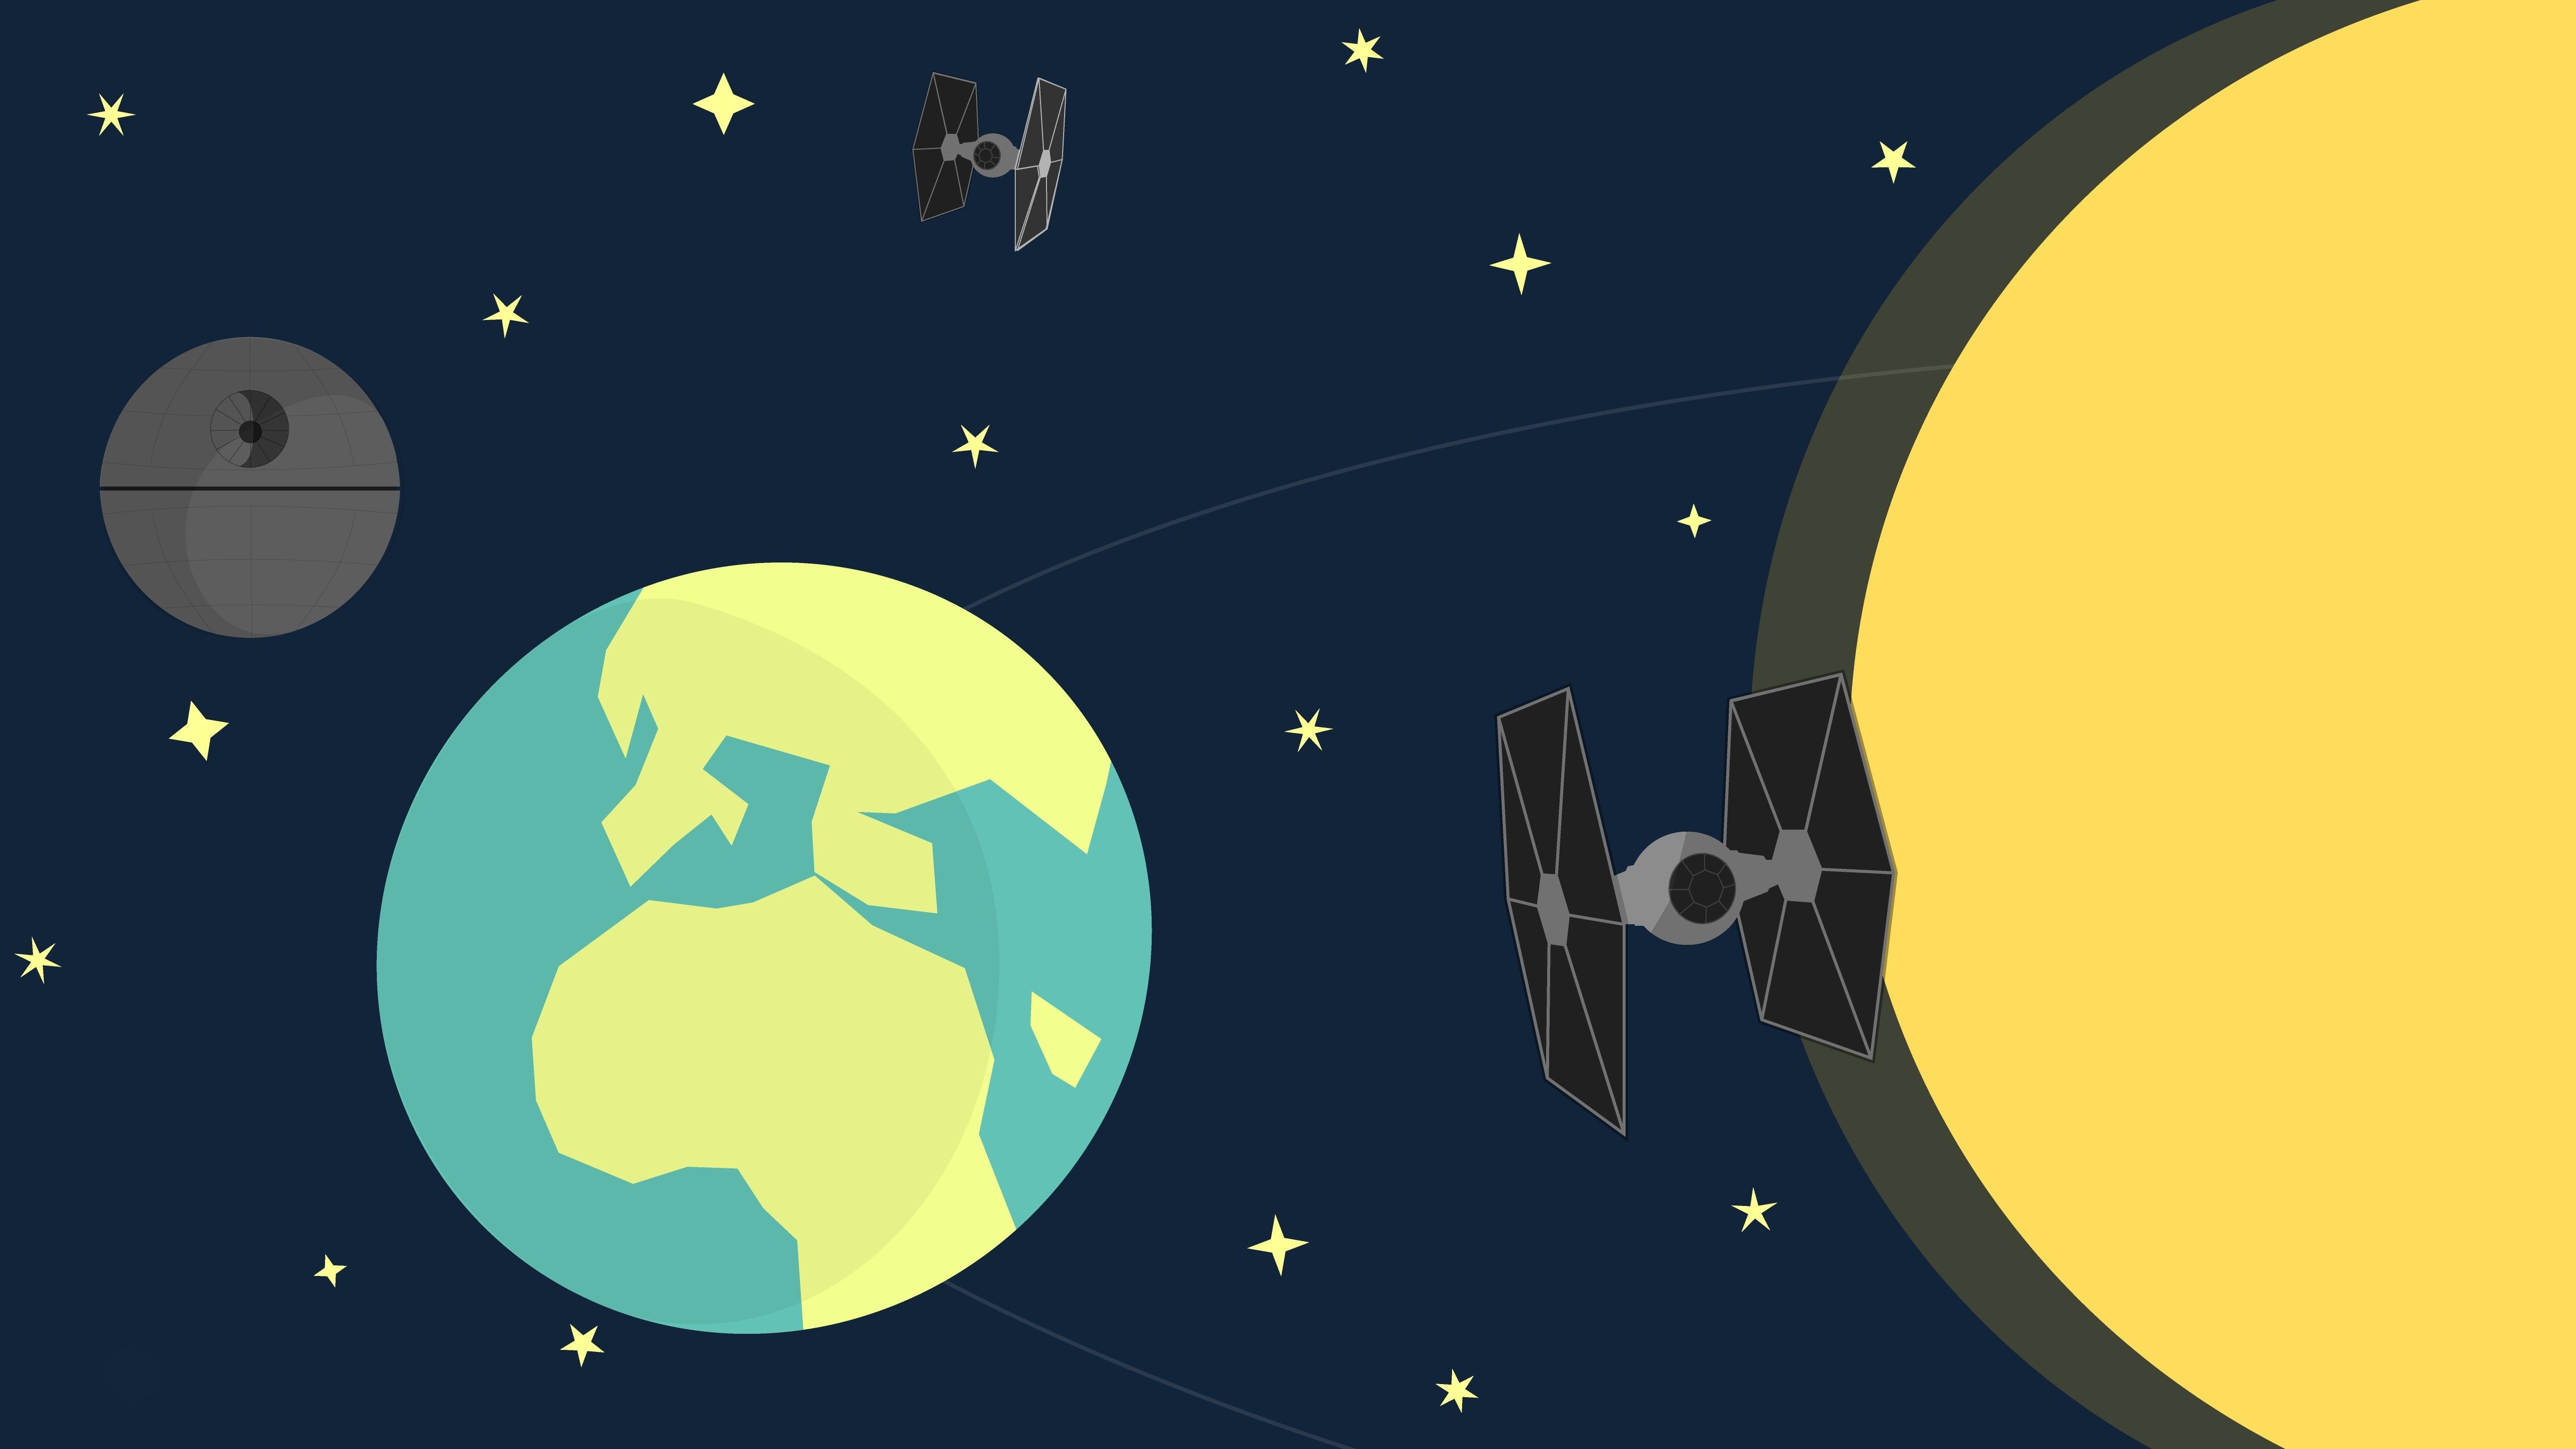 Wallpaper, illustration, Star Wars, planet, space, minimalism, artwork, Earth, cartoon, circle, atmosphere, TIE Fighter, Death Star, line, number, screenshot, font, astronomical object 5120x2880